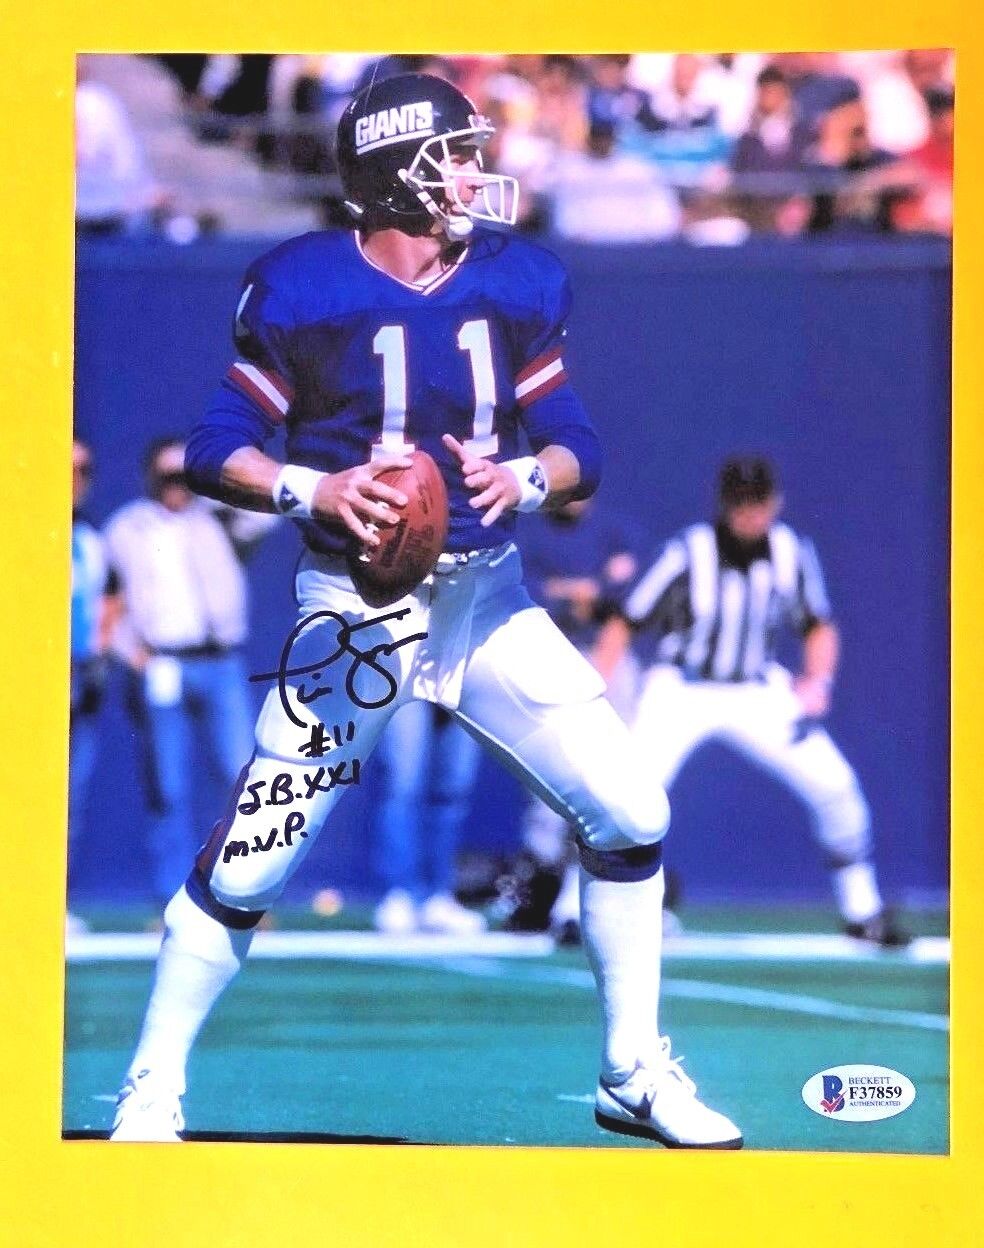 PHIL SIMMS SIGNED 8X10 W/SBMVP INSCRIPTION NEW YPRK GIANTS Photo Poster painting BECKETT CERTIFI